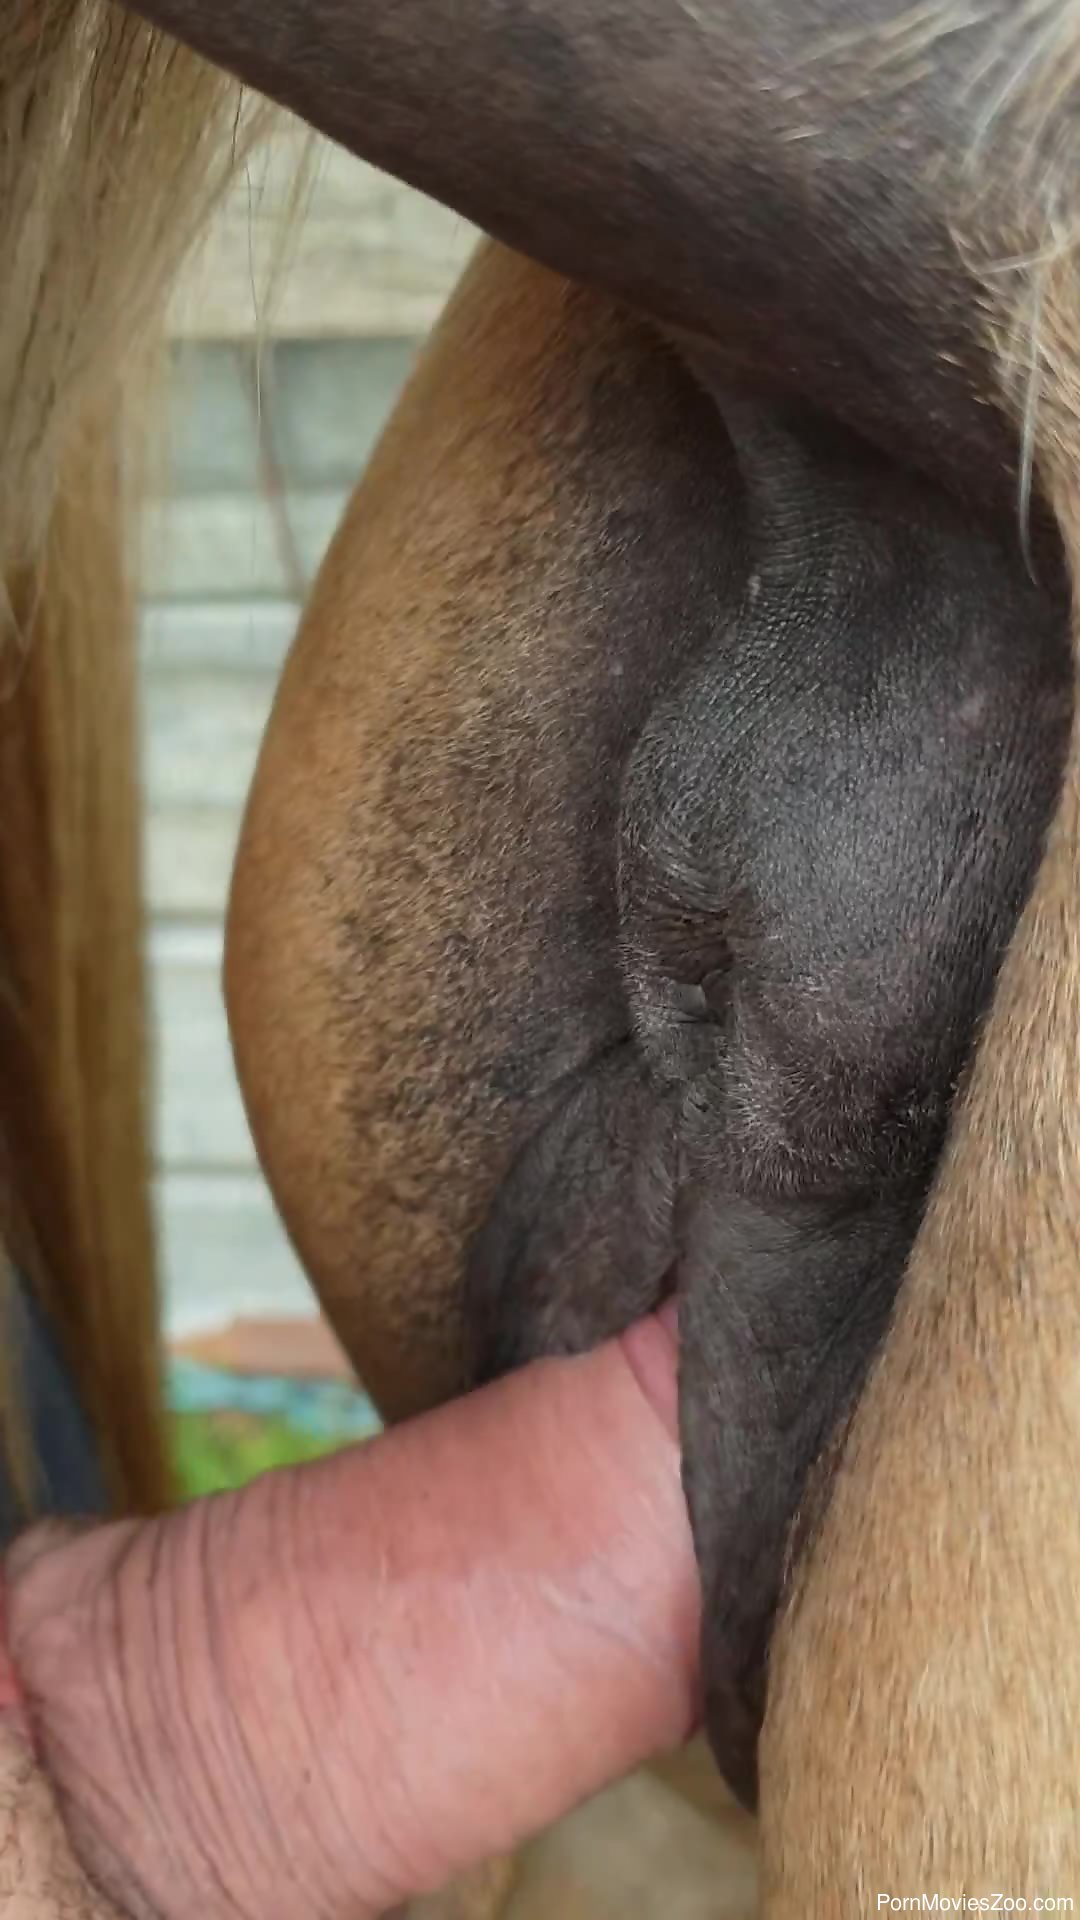 Horse And Girl Sex Fuking Video 2019 - Juicy horse pussy is just like a fucking magnet